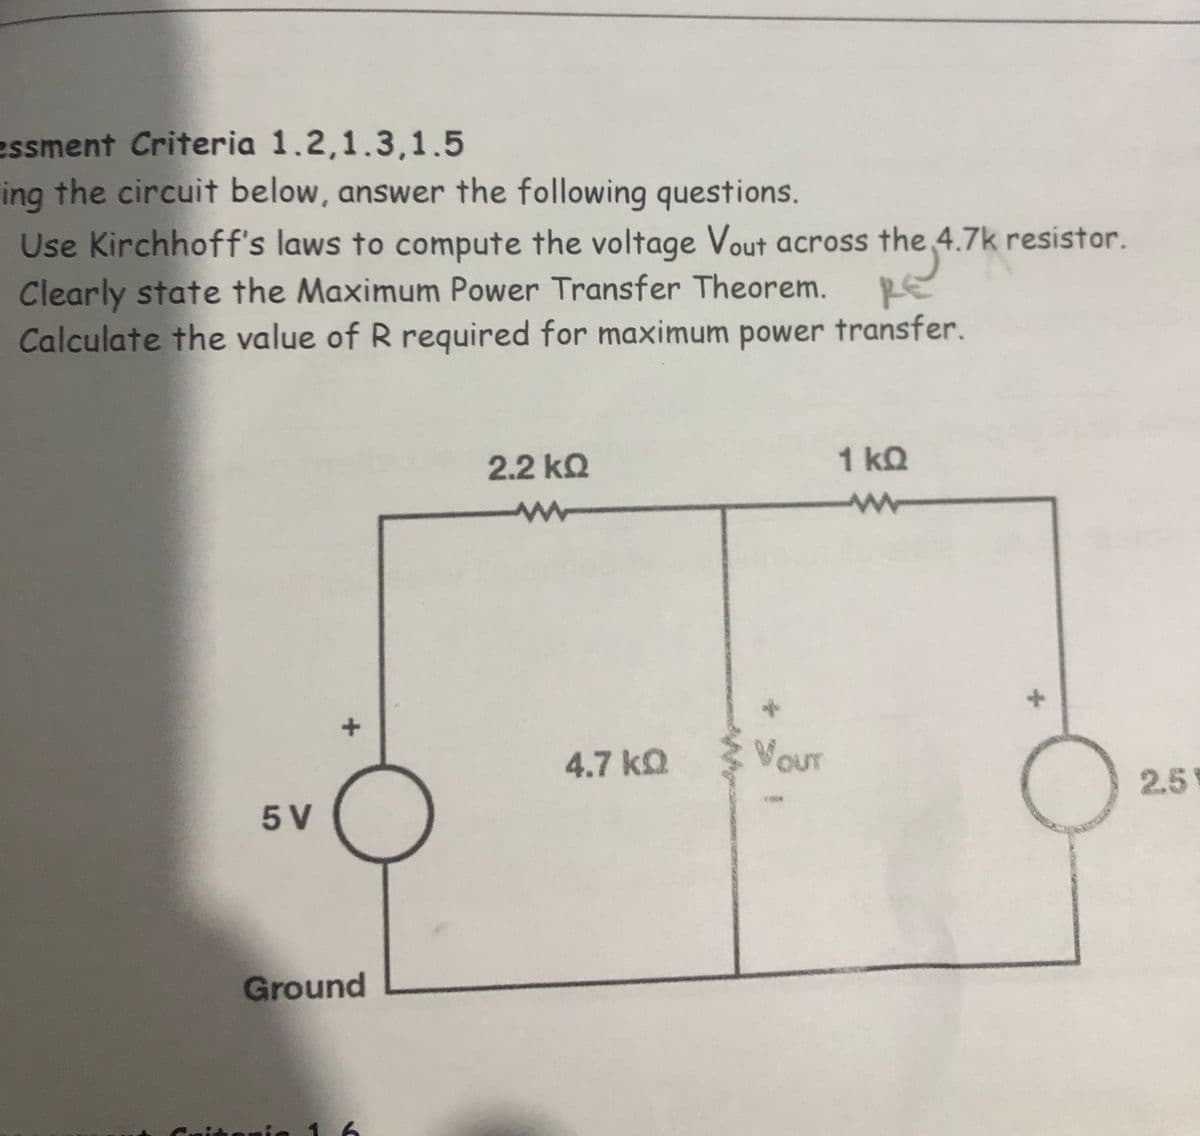 essment Criteria 1.2,1.3,1.5
ing the circuit below, answer the following questions.
Use Kirchhoff's laws to compute the voltage Vout across the 4.7k resistor.
Clearly state the Maximum Power Transfer Theorem.
Calculate the value of R required for maximum power transfer.
RE
2.2 kQ
1 kQ
4.7 ka
VouT
2.5
5 V
Ground
1 6
